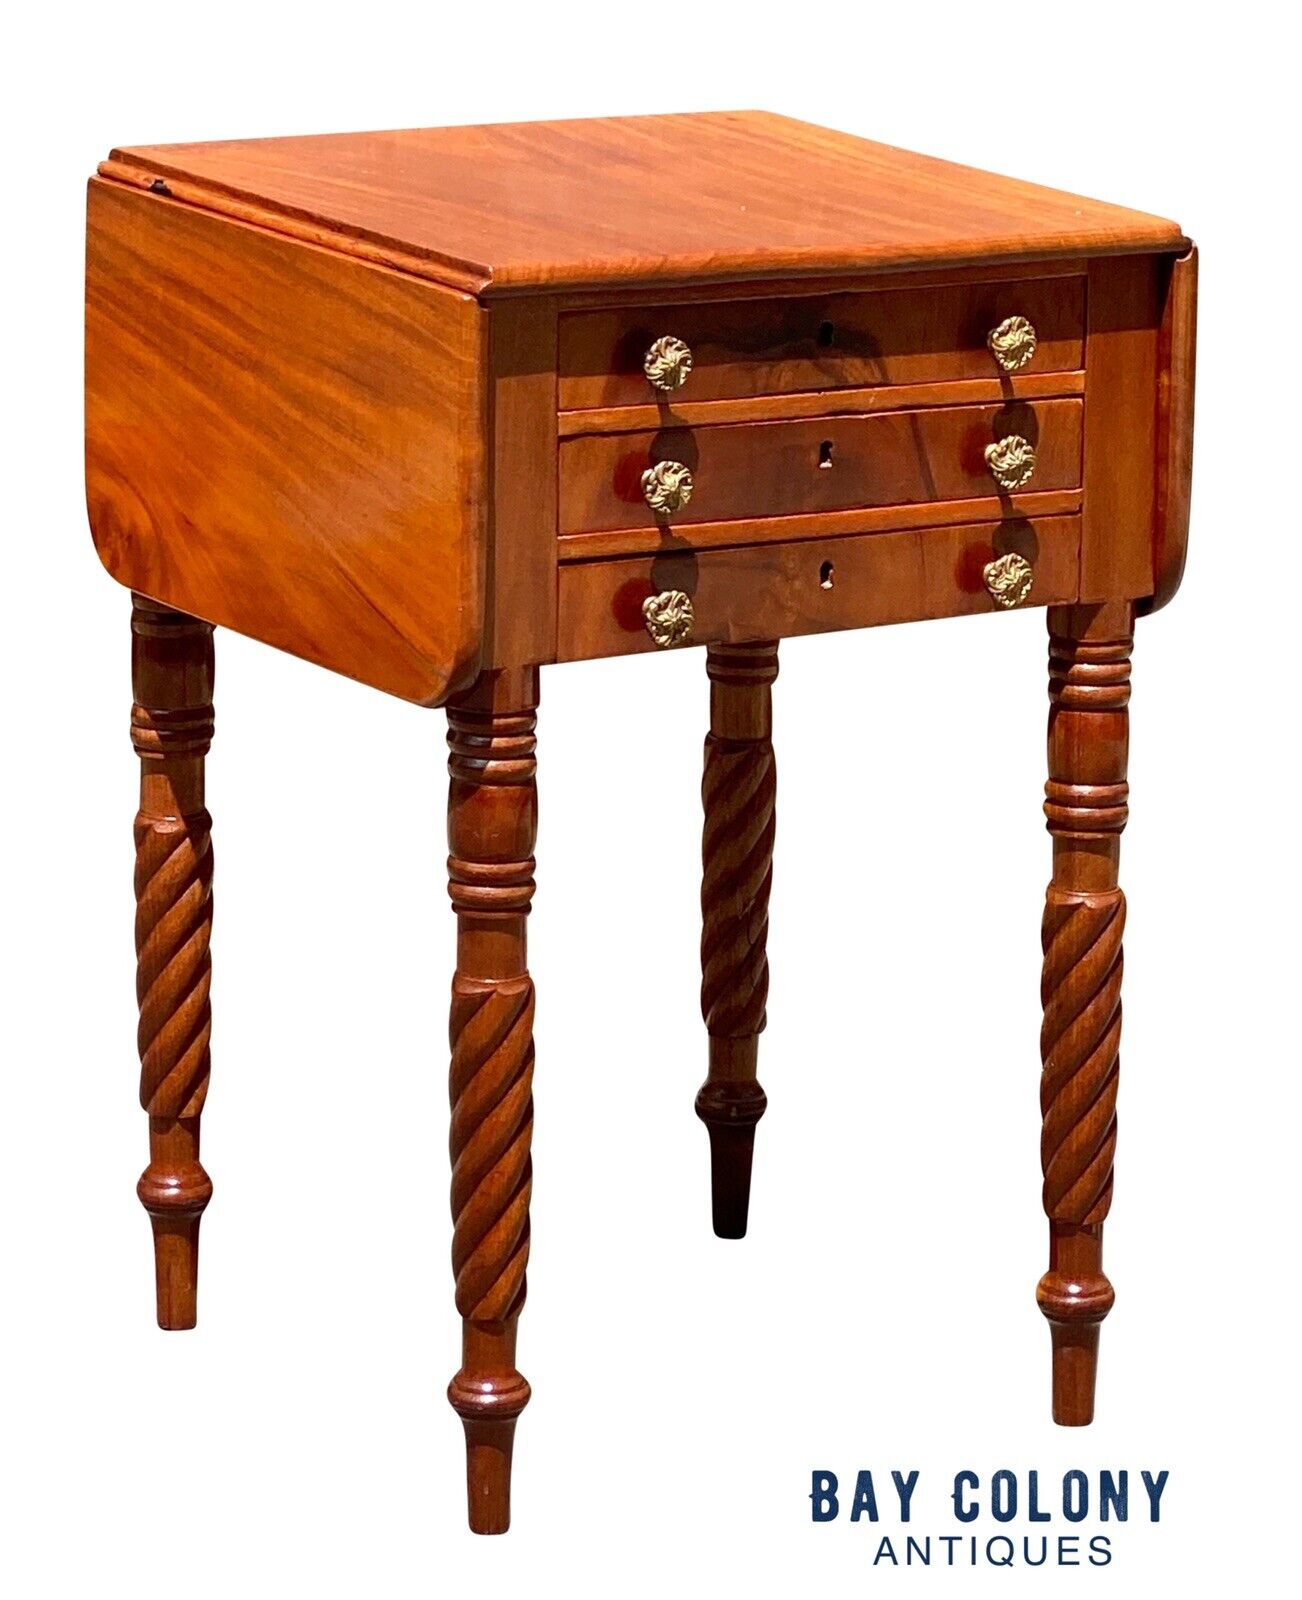 19th C Antique Mahogany 3 Drawer Worktable / Nightstand with Rope Carved Legs